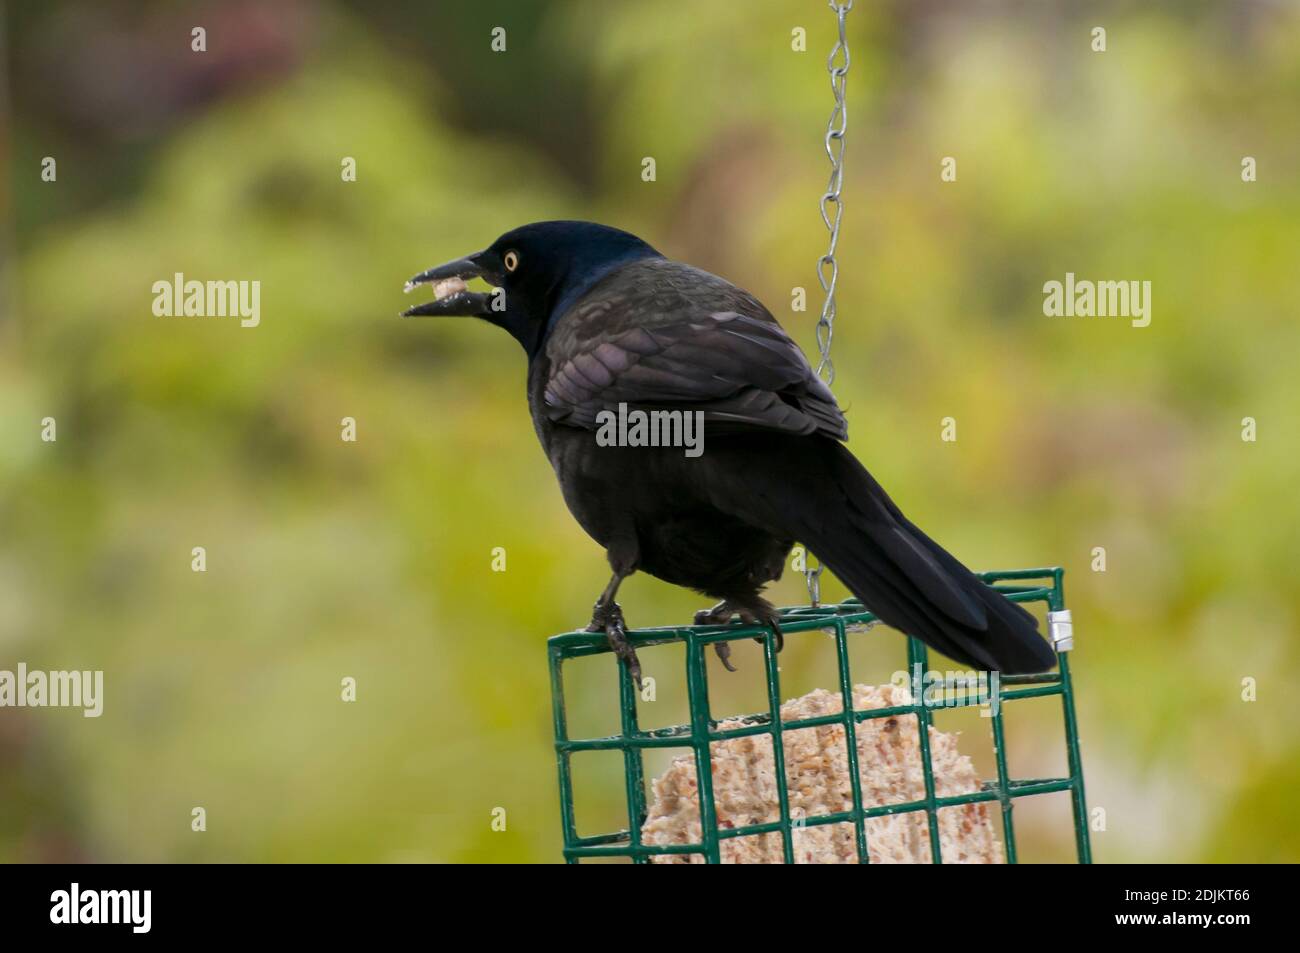 Vadnais heights, Minnesota. Male Common Grackle, Quiscalus quiscula eating from a suet feeder for birds. Stock Photo